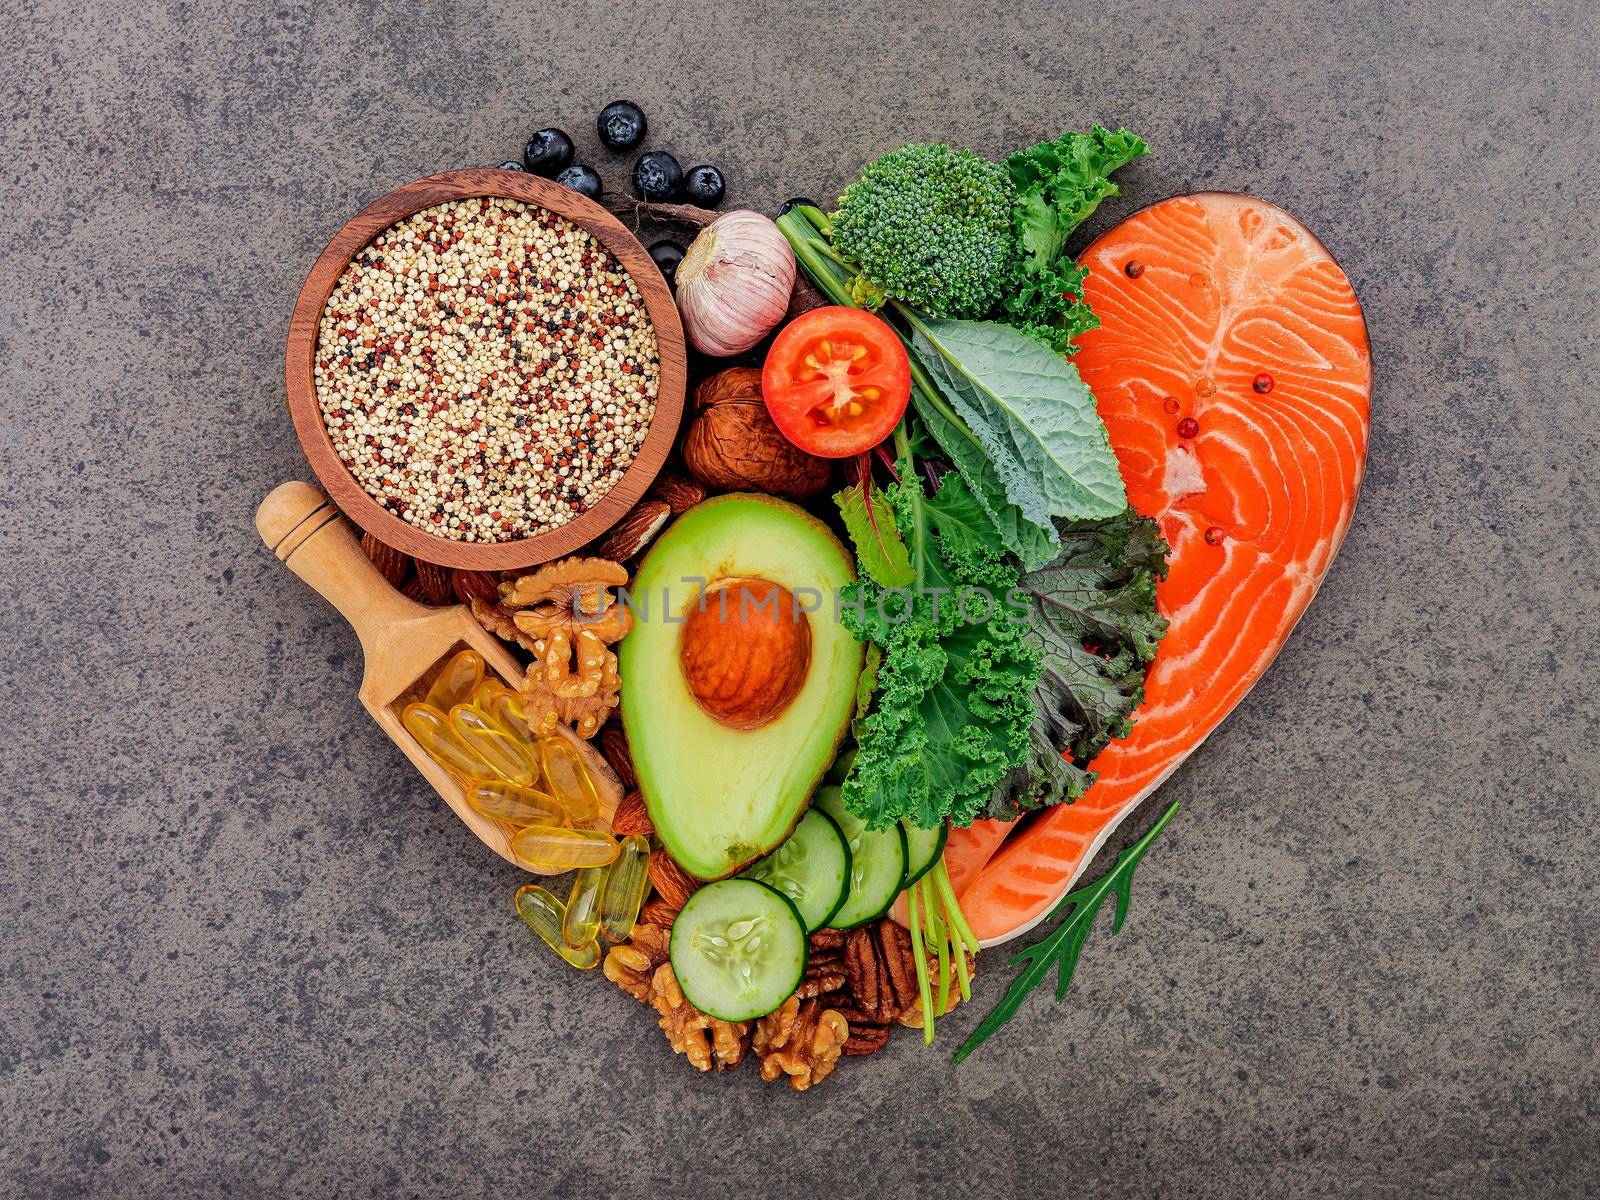 Heart shape of ketogenic low carbs diet concept. Ingredients for healthy foods selection on dark stone background. by kerdkanno